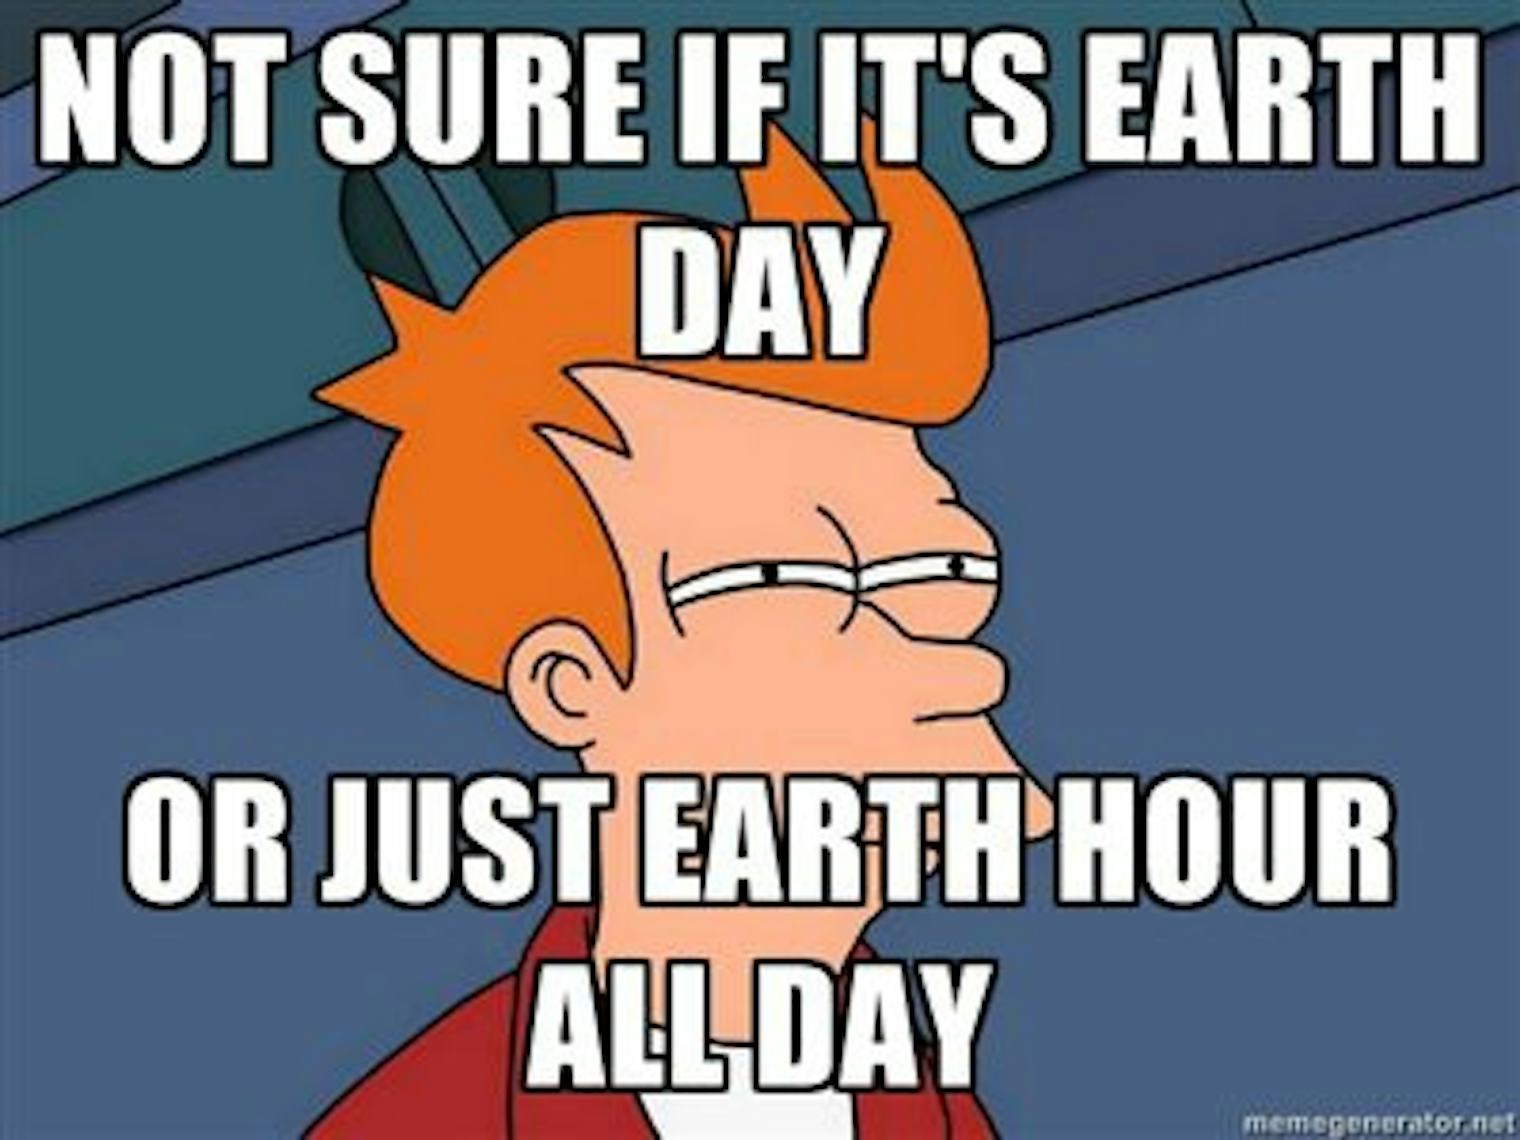 13 Earth Day Memes That Will Make You Laugh, And Also Make You Think